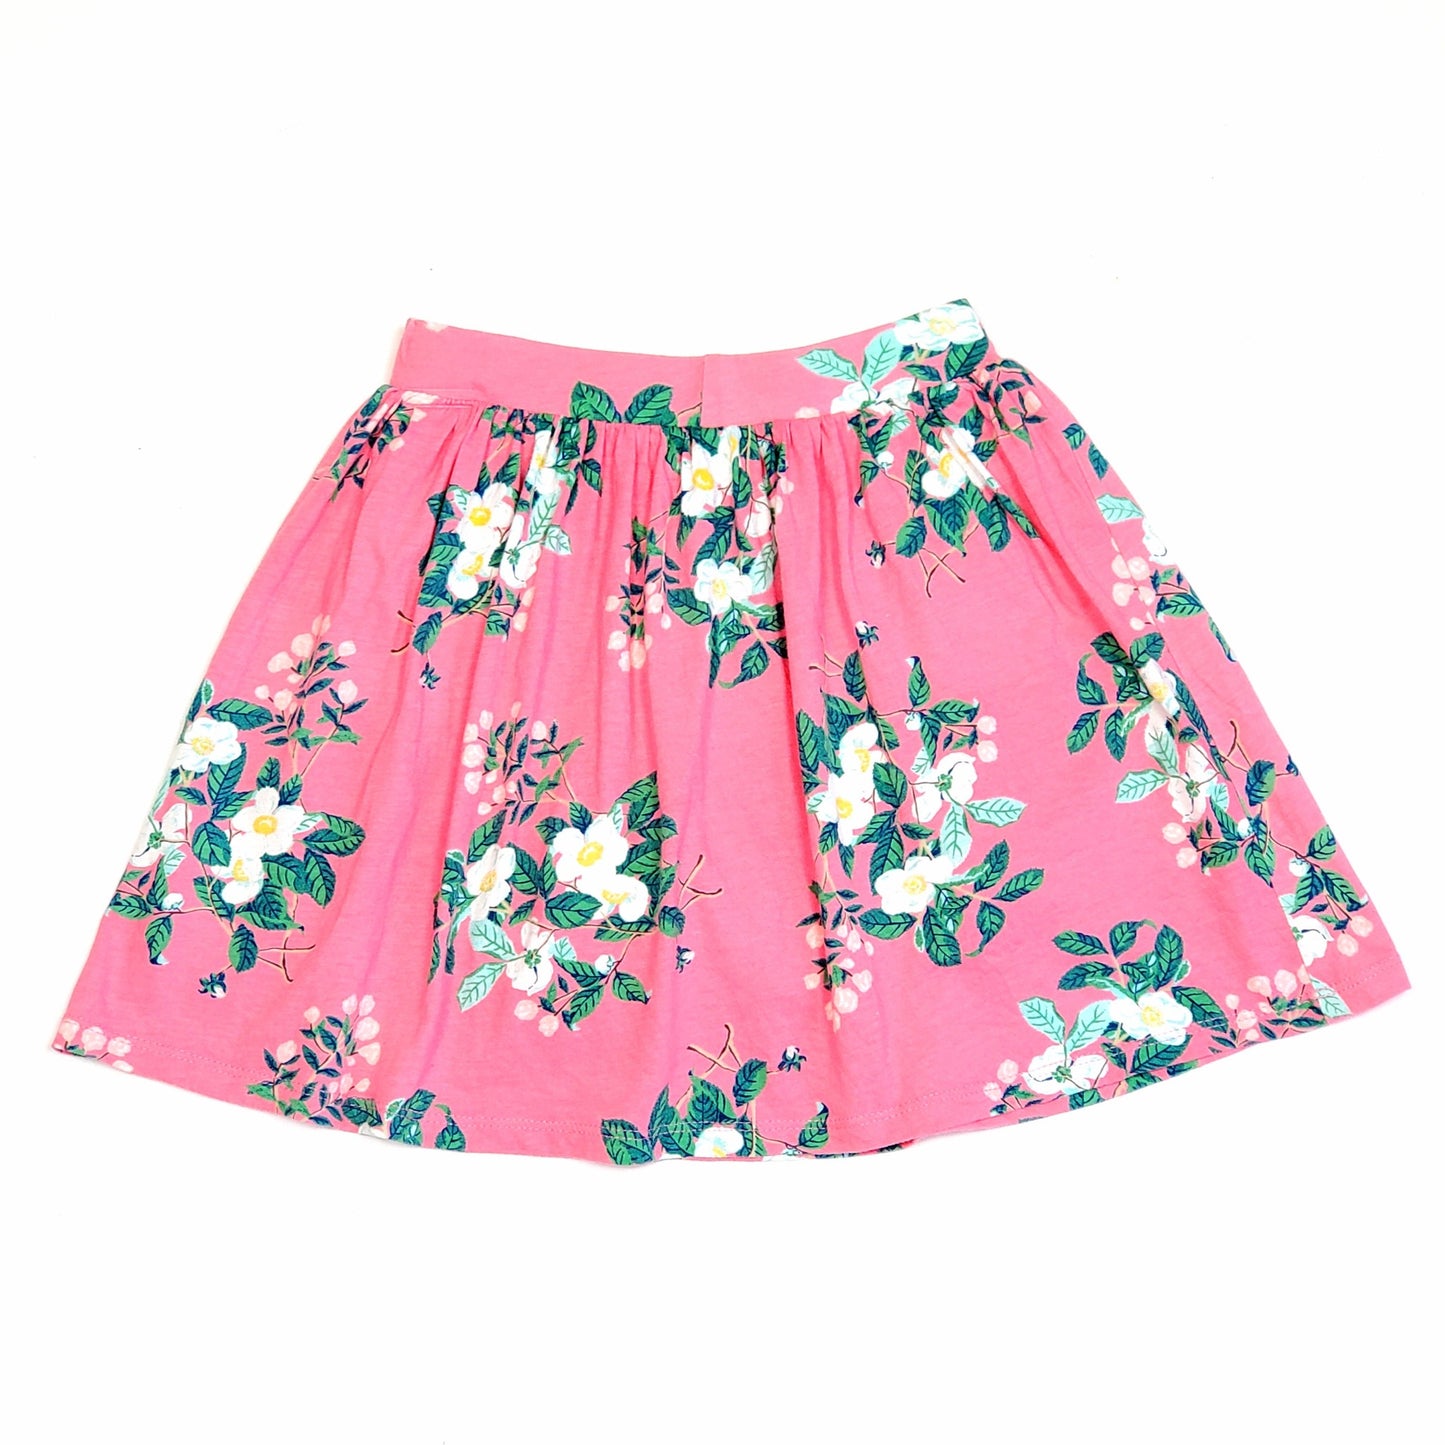 Carters Girls Pink Floral Skort Size 8 Used View 3